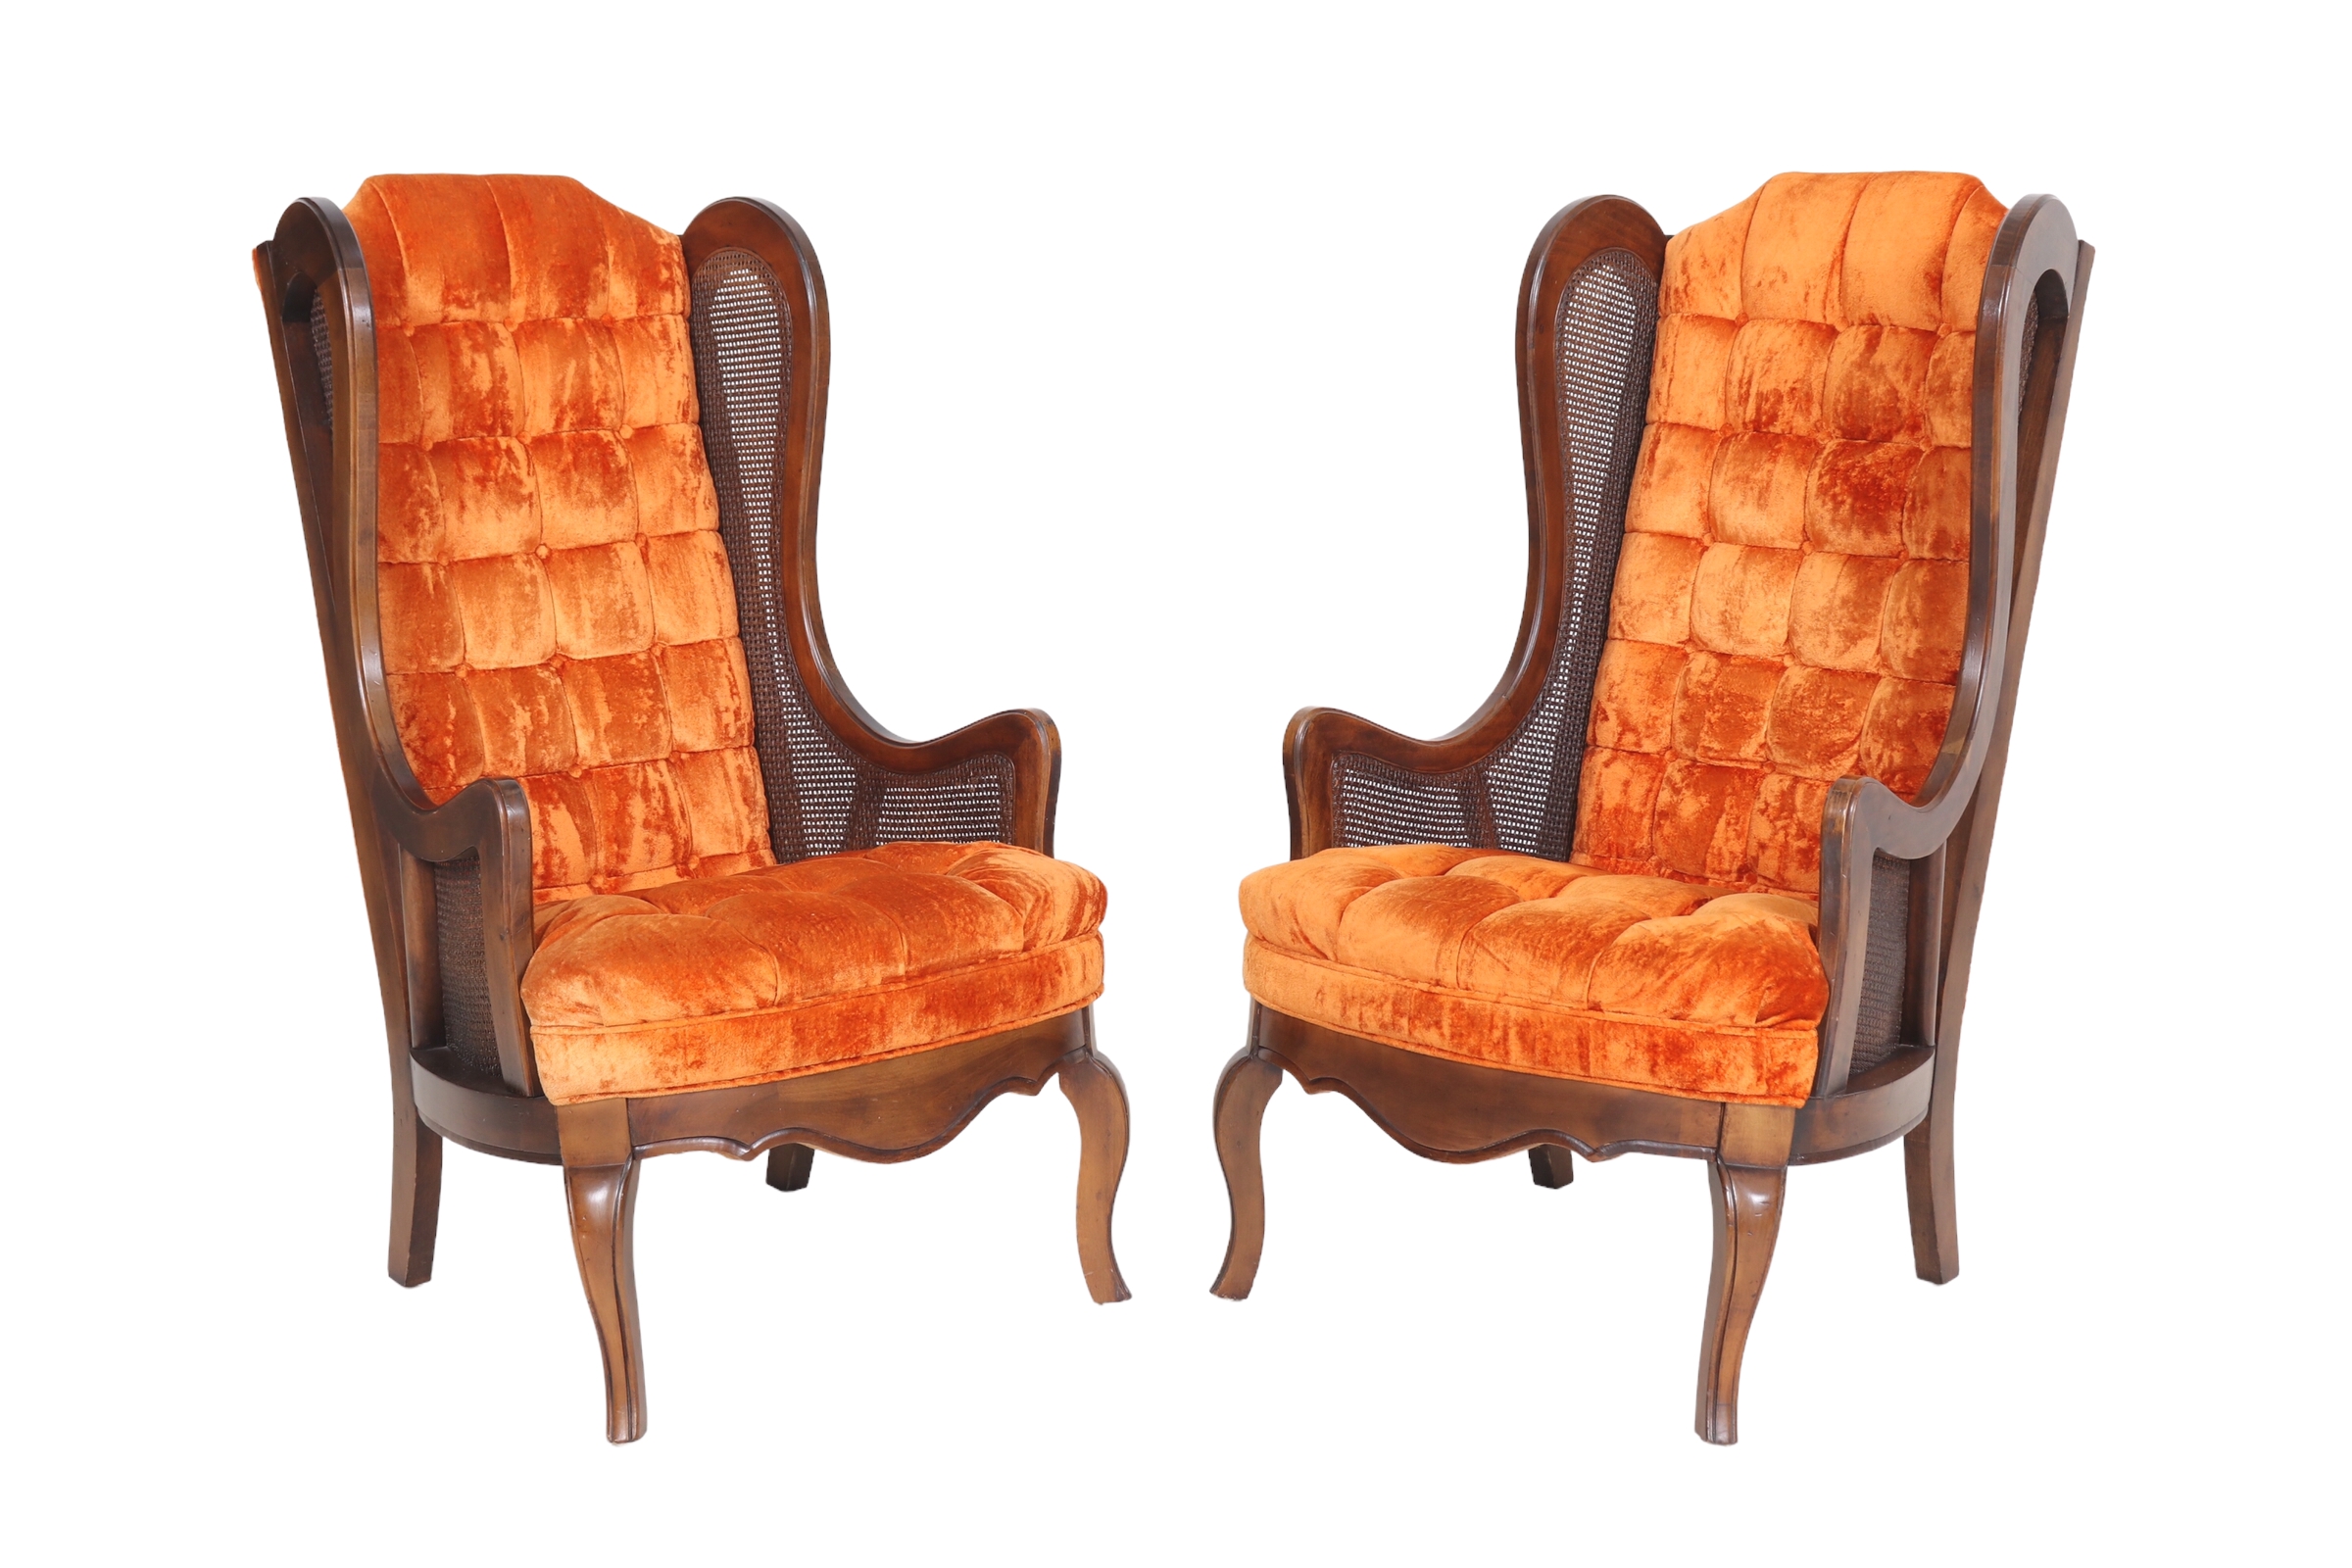 1960’s Caned Wingback Chairs by Lewittes~P77666105